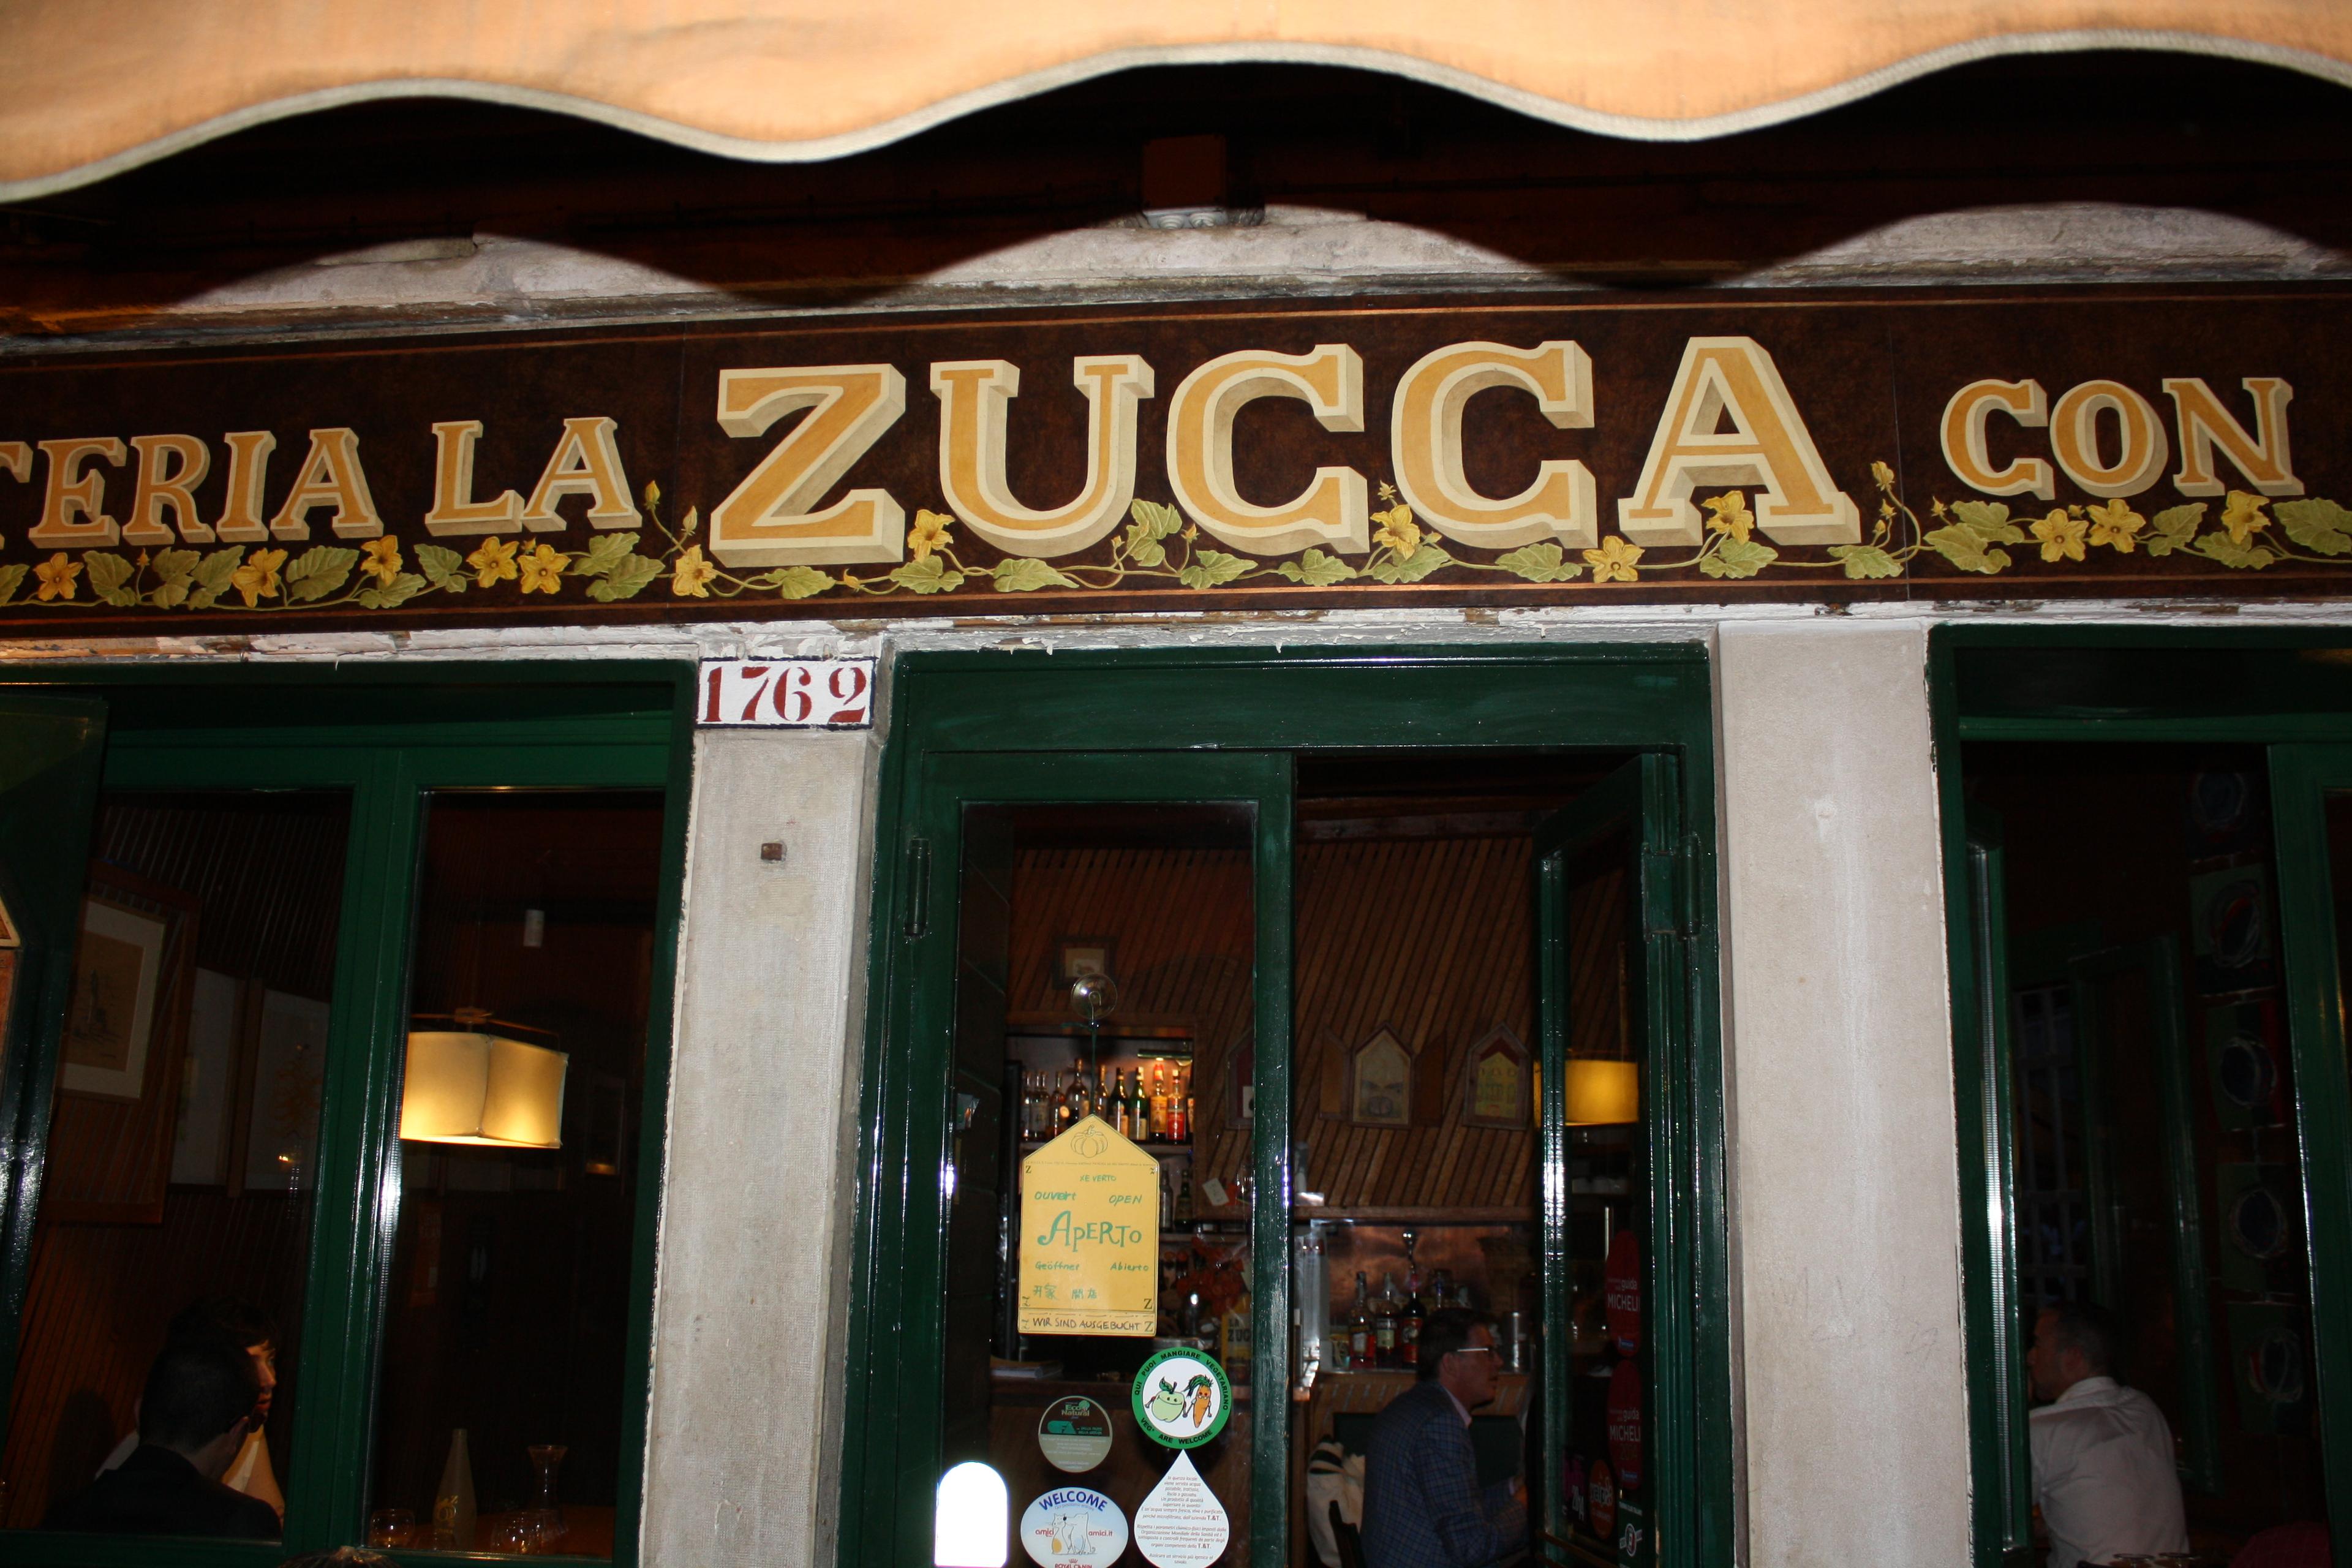 Cover image of this place La Zucca